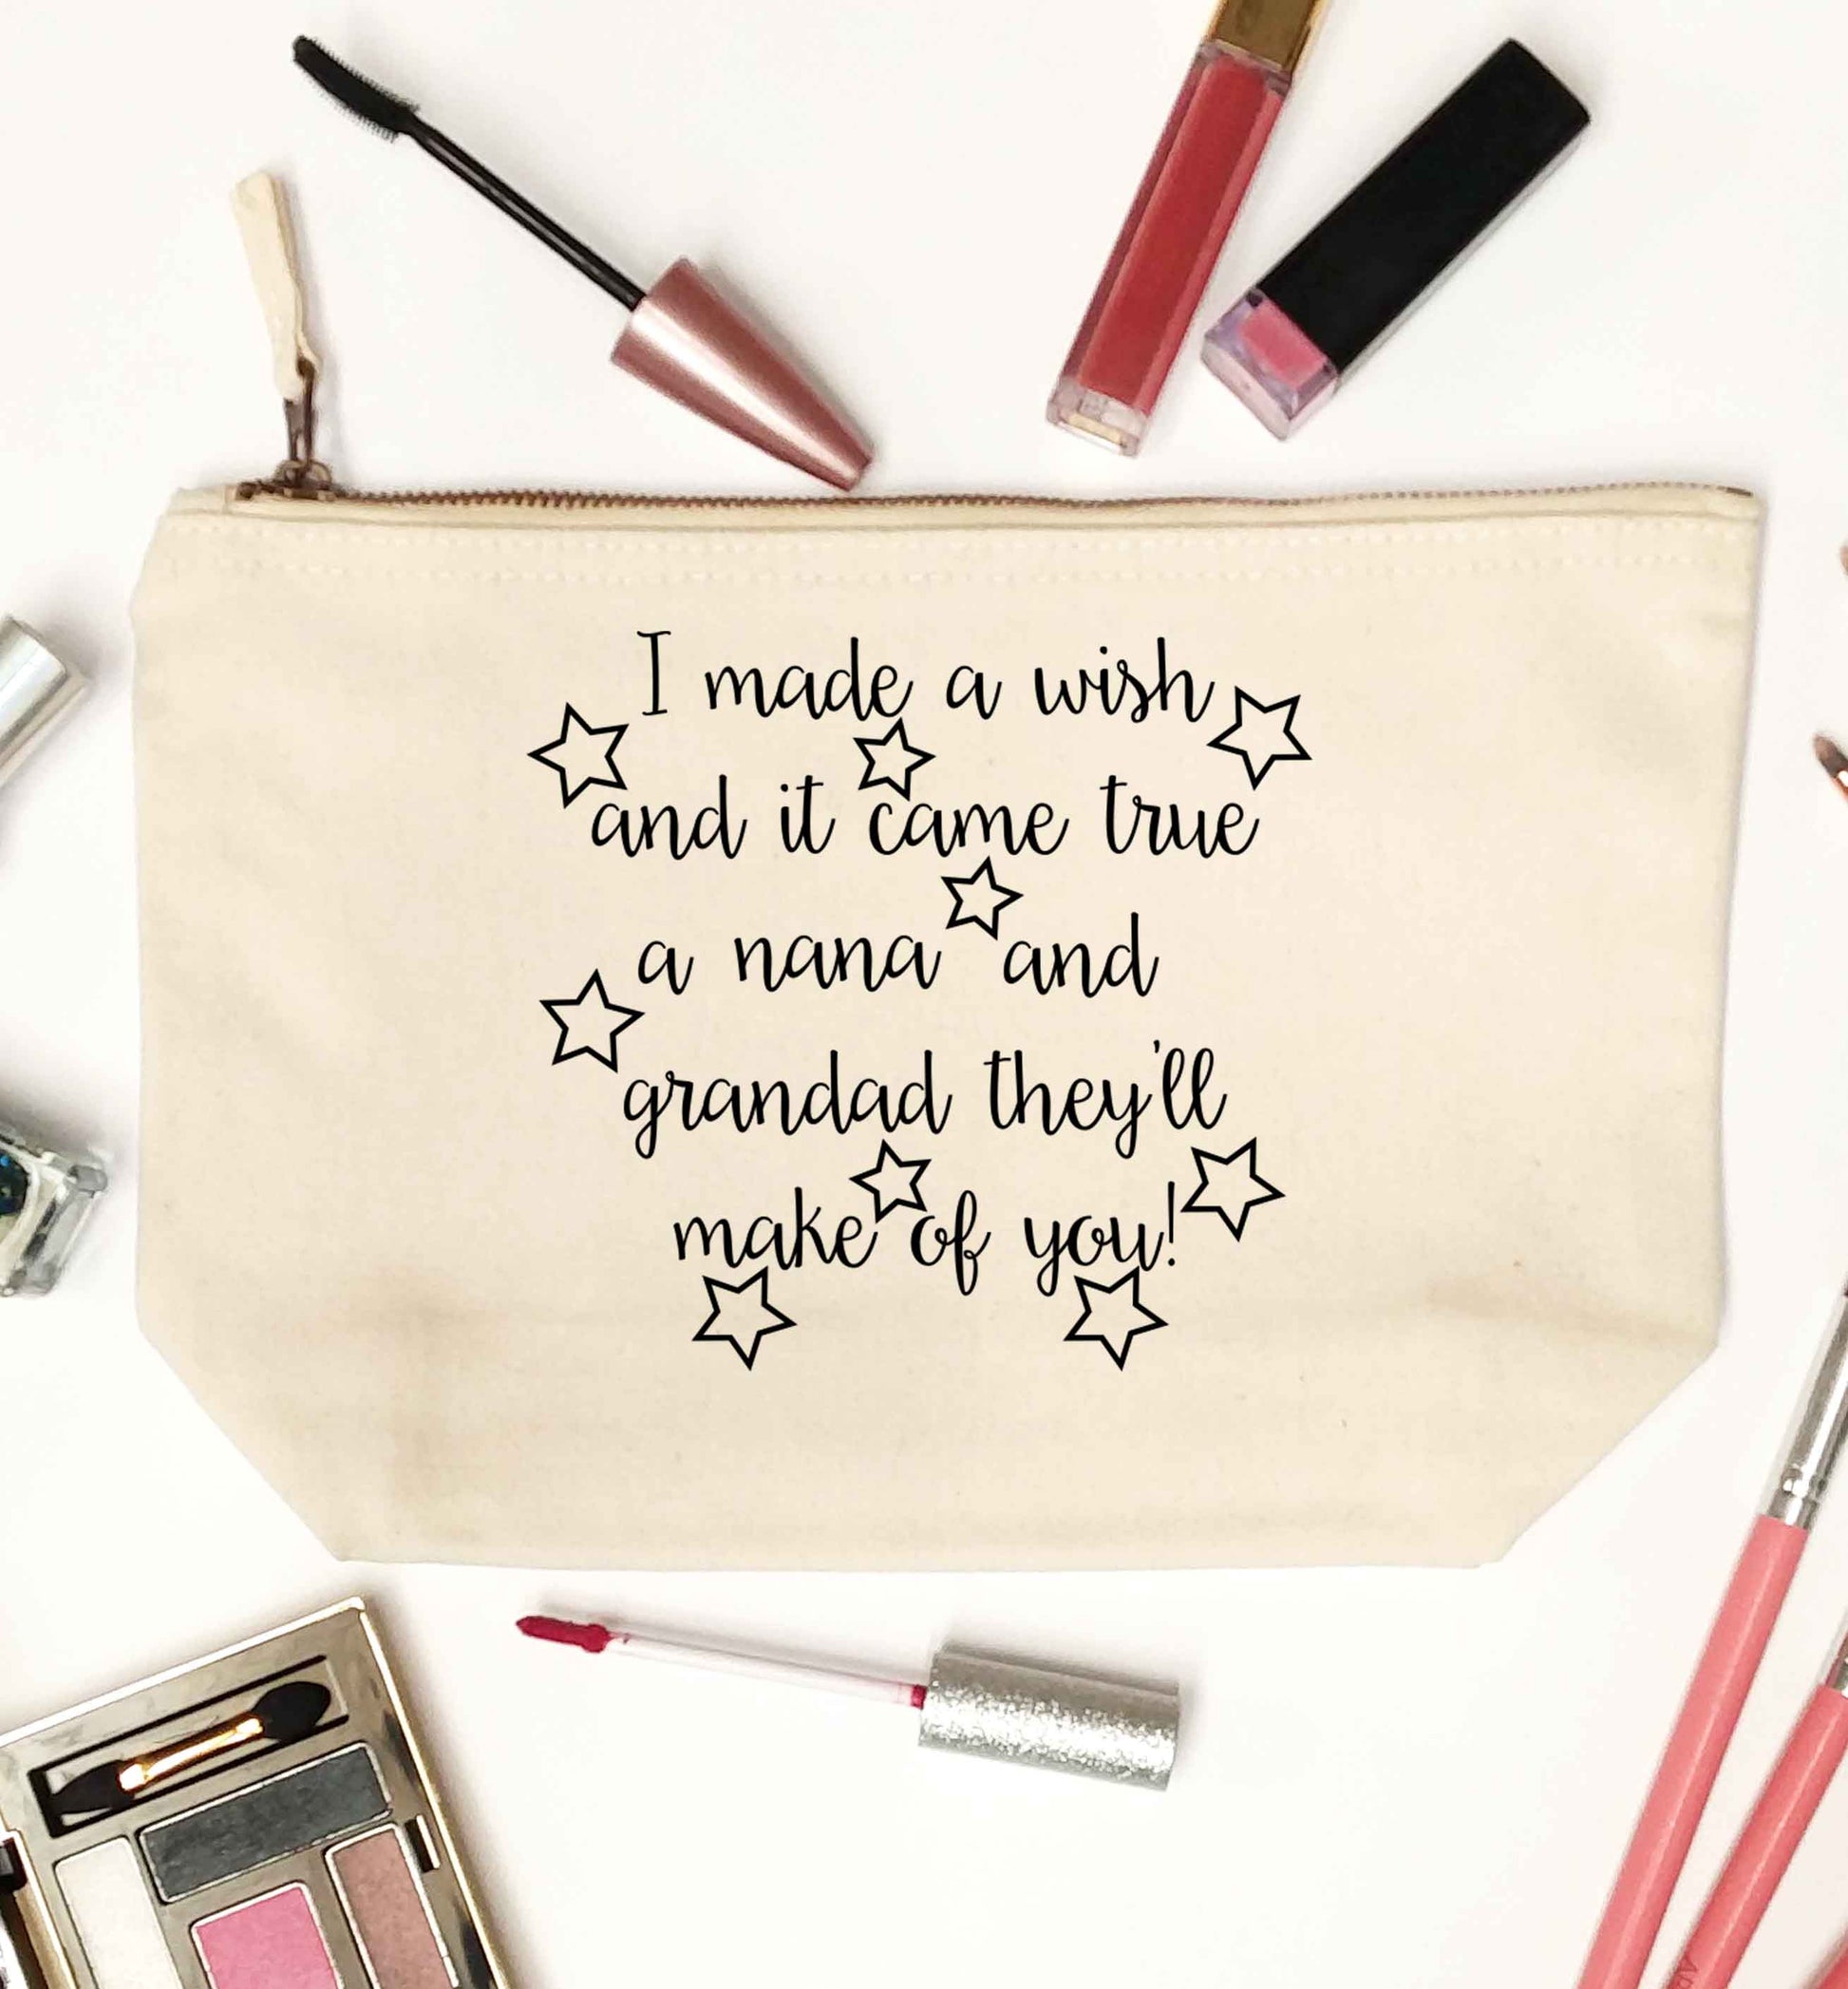 I made a wish and it came true a nana and grandad they'll make of you! natural makeup bag